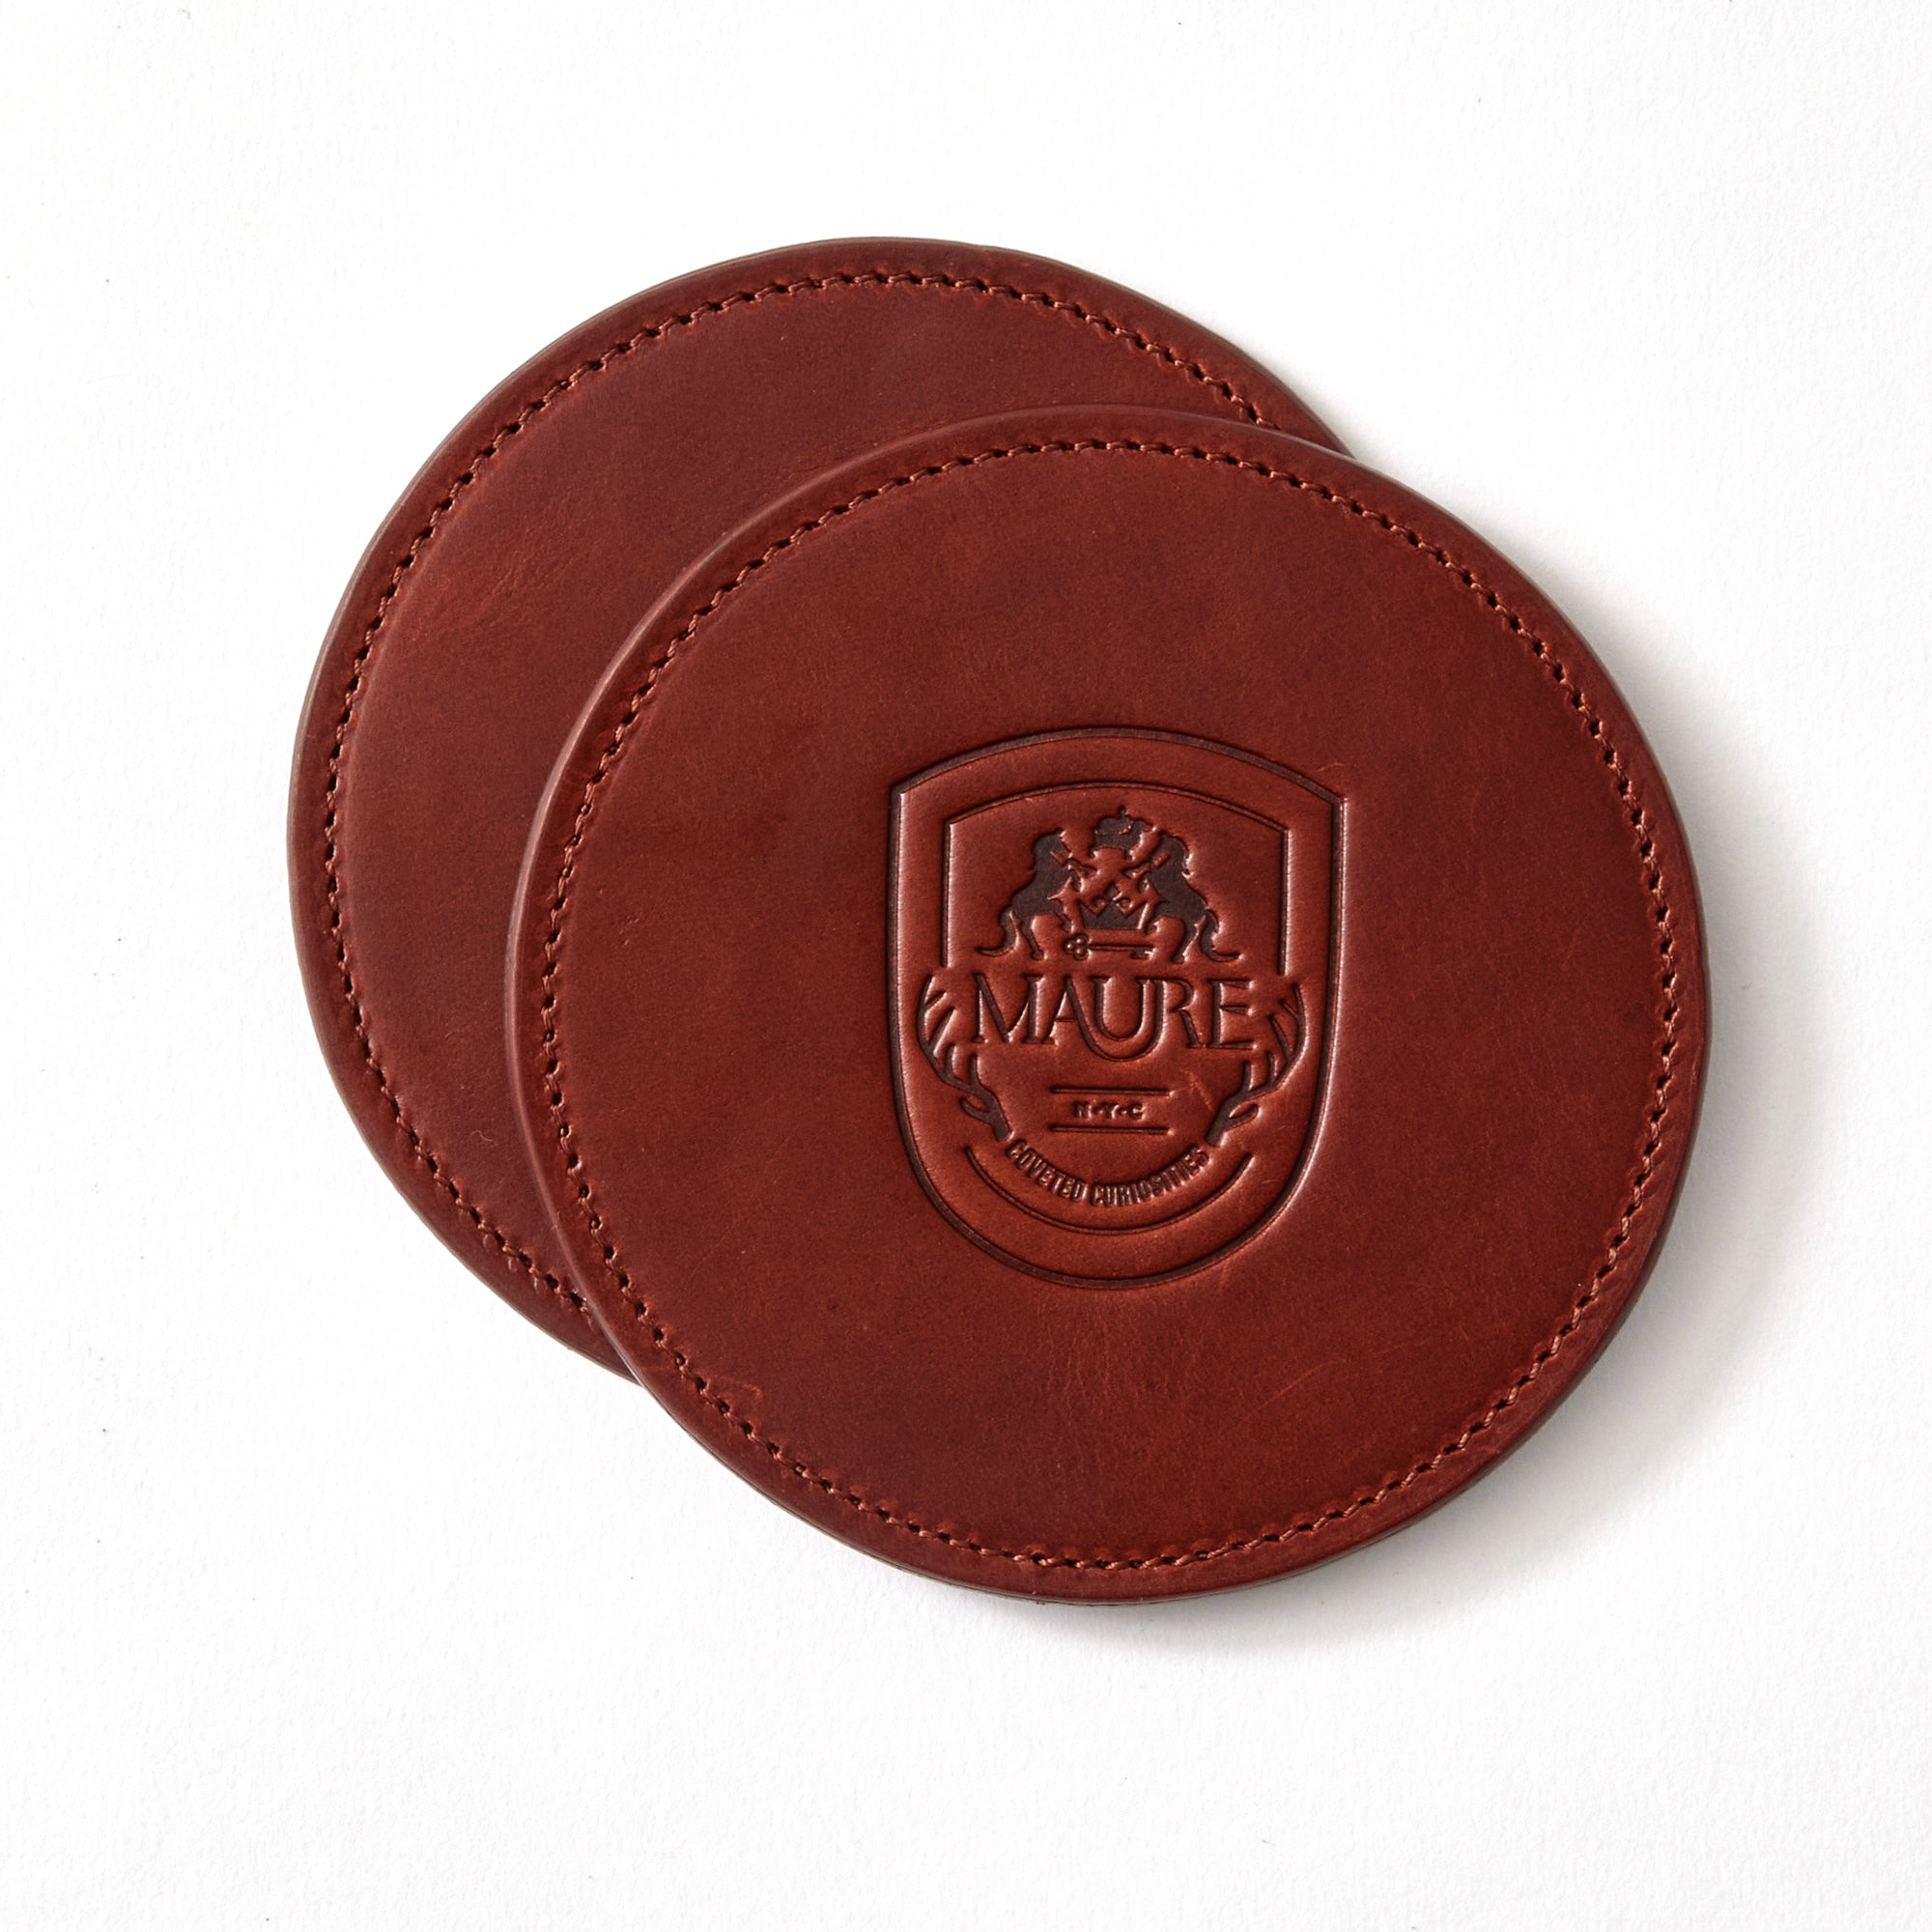 a pair of brown coasters with a logo on them